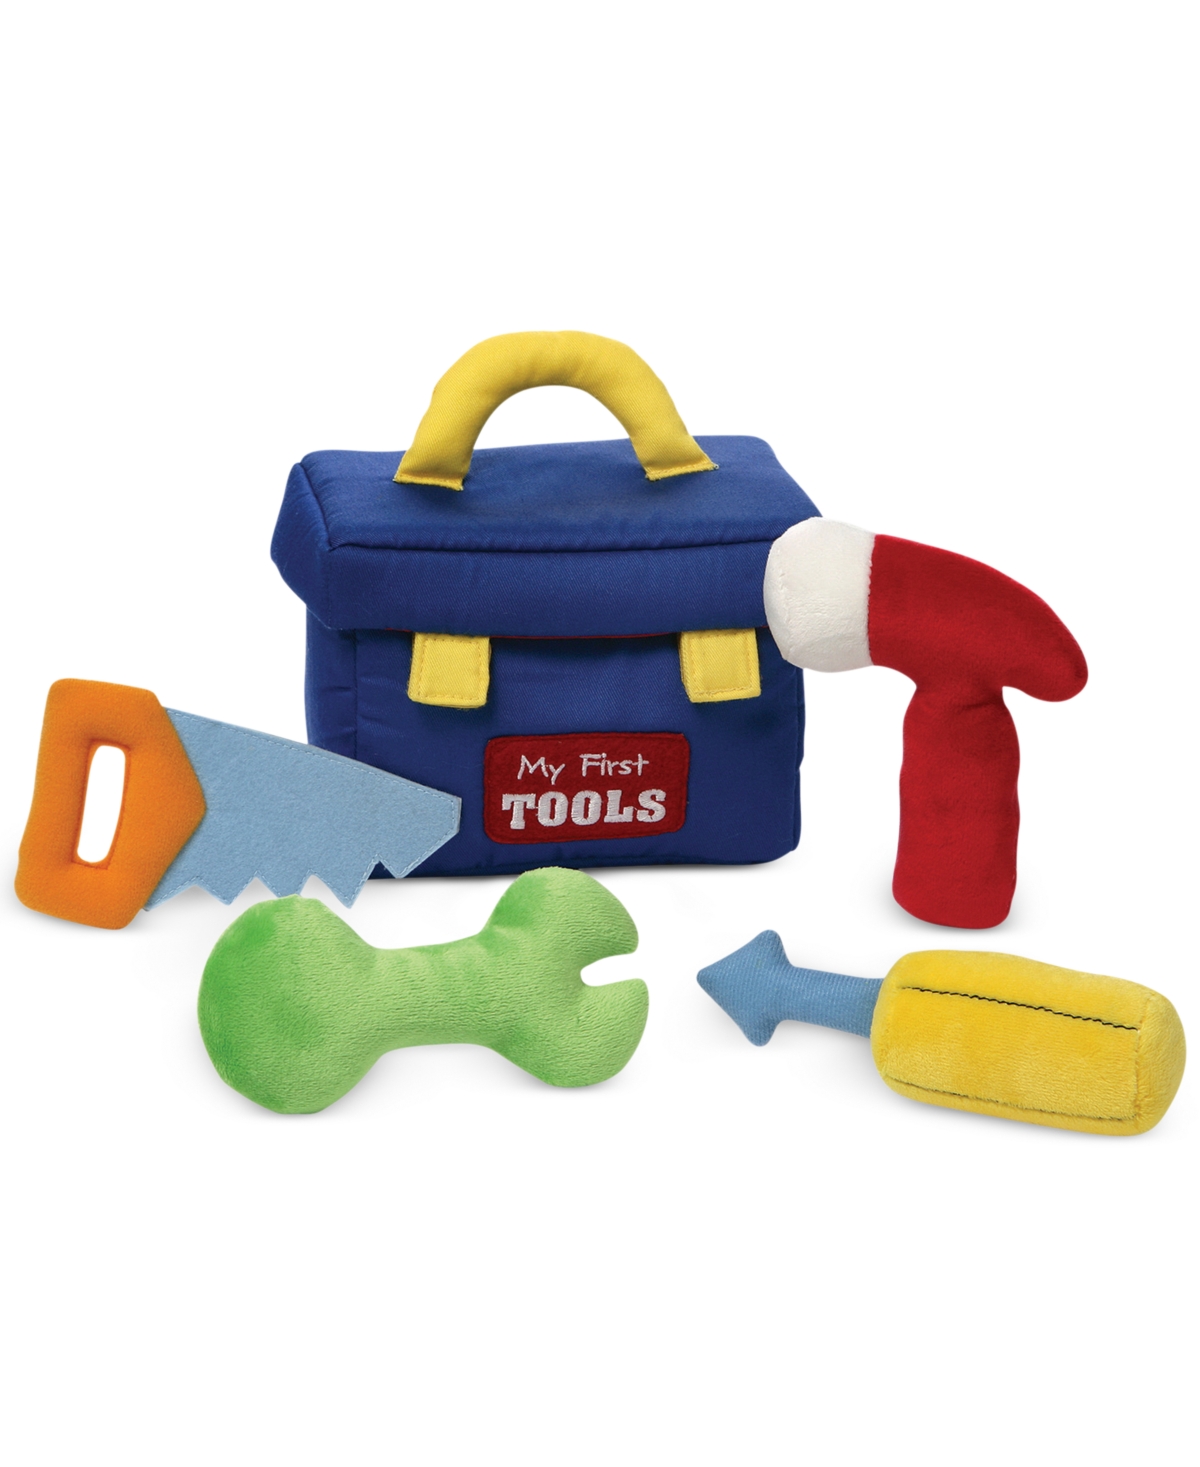 UPC 028399071593 product image for Gund Baby My First Toolbox Playset Toy | upcitemdb.com